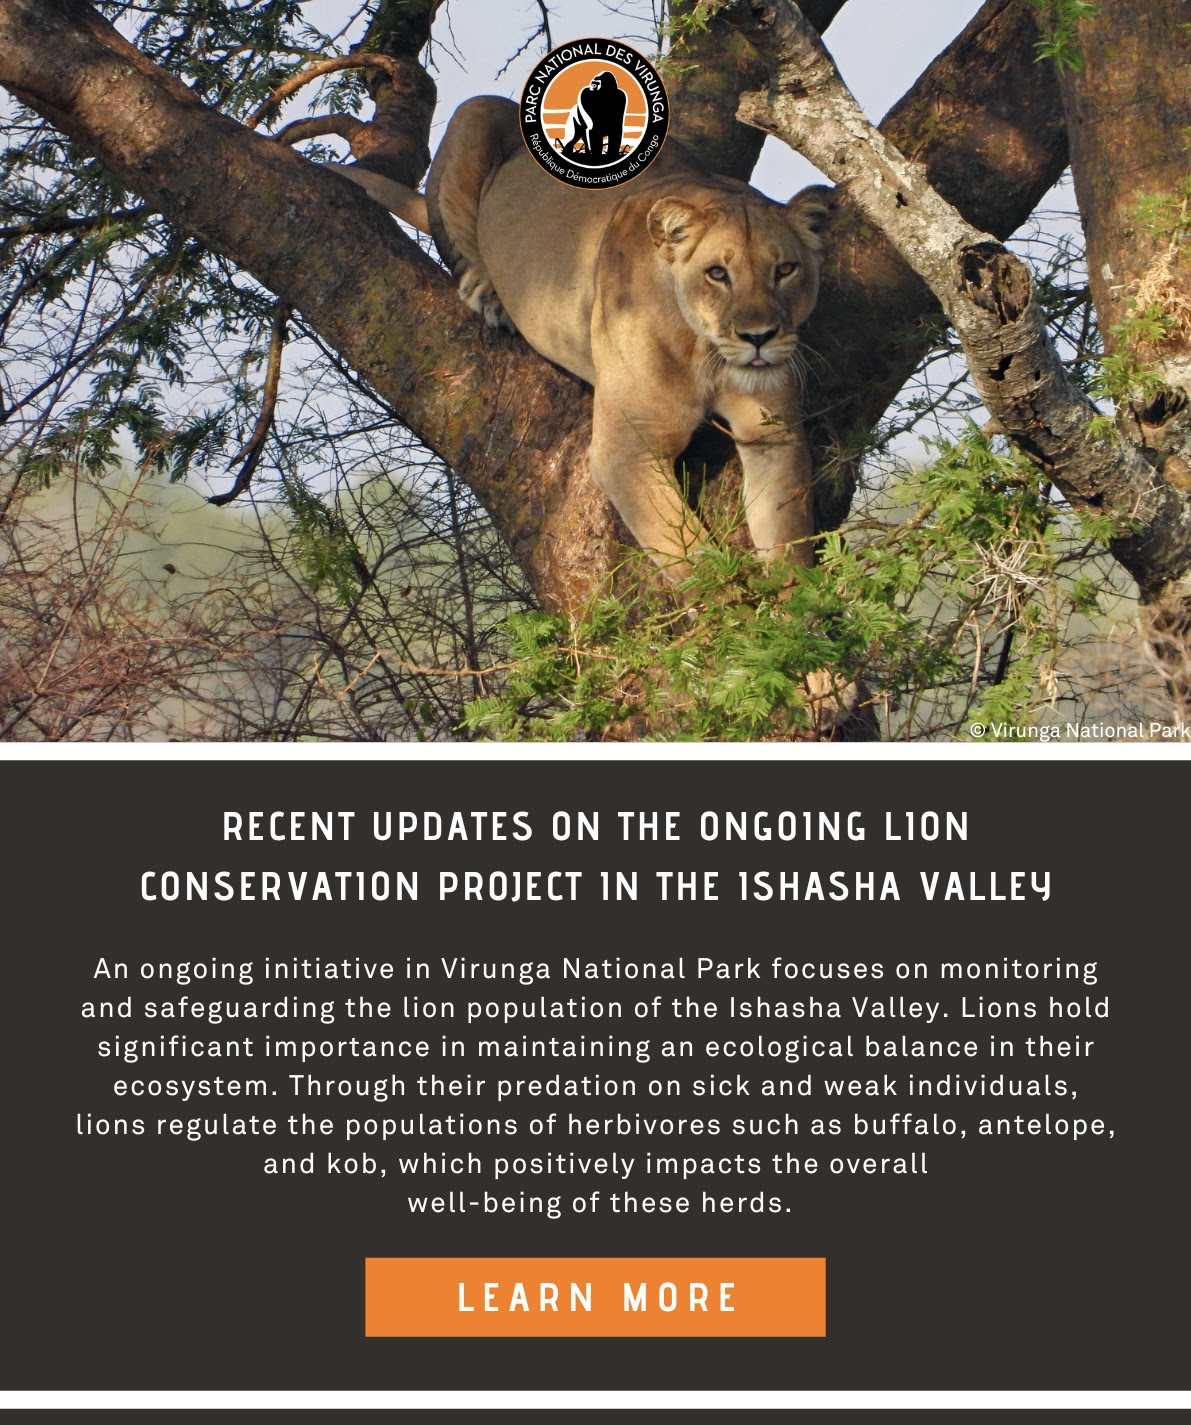 An ongoing initiative in Virunga National Park focuses on monitoring and safeguarding the lion population of the Ishasha Valley. Lions hold significant importance in maintaining an ecological balance in their ecosystem.